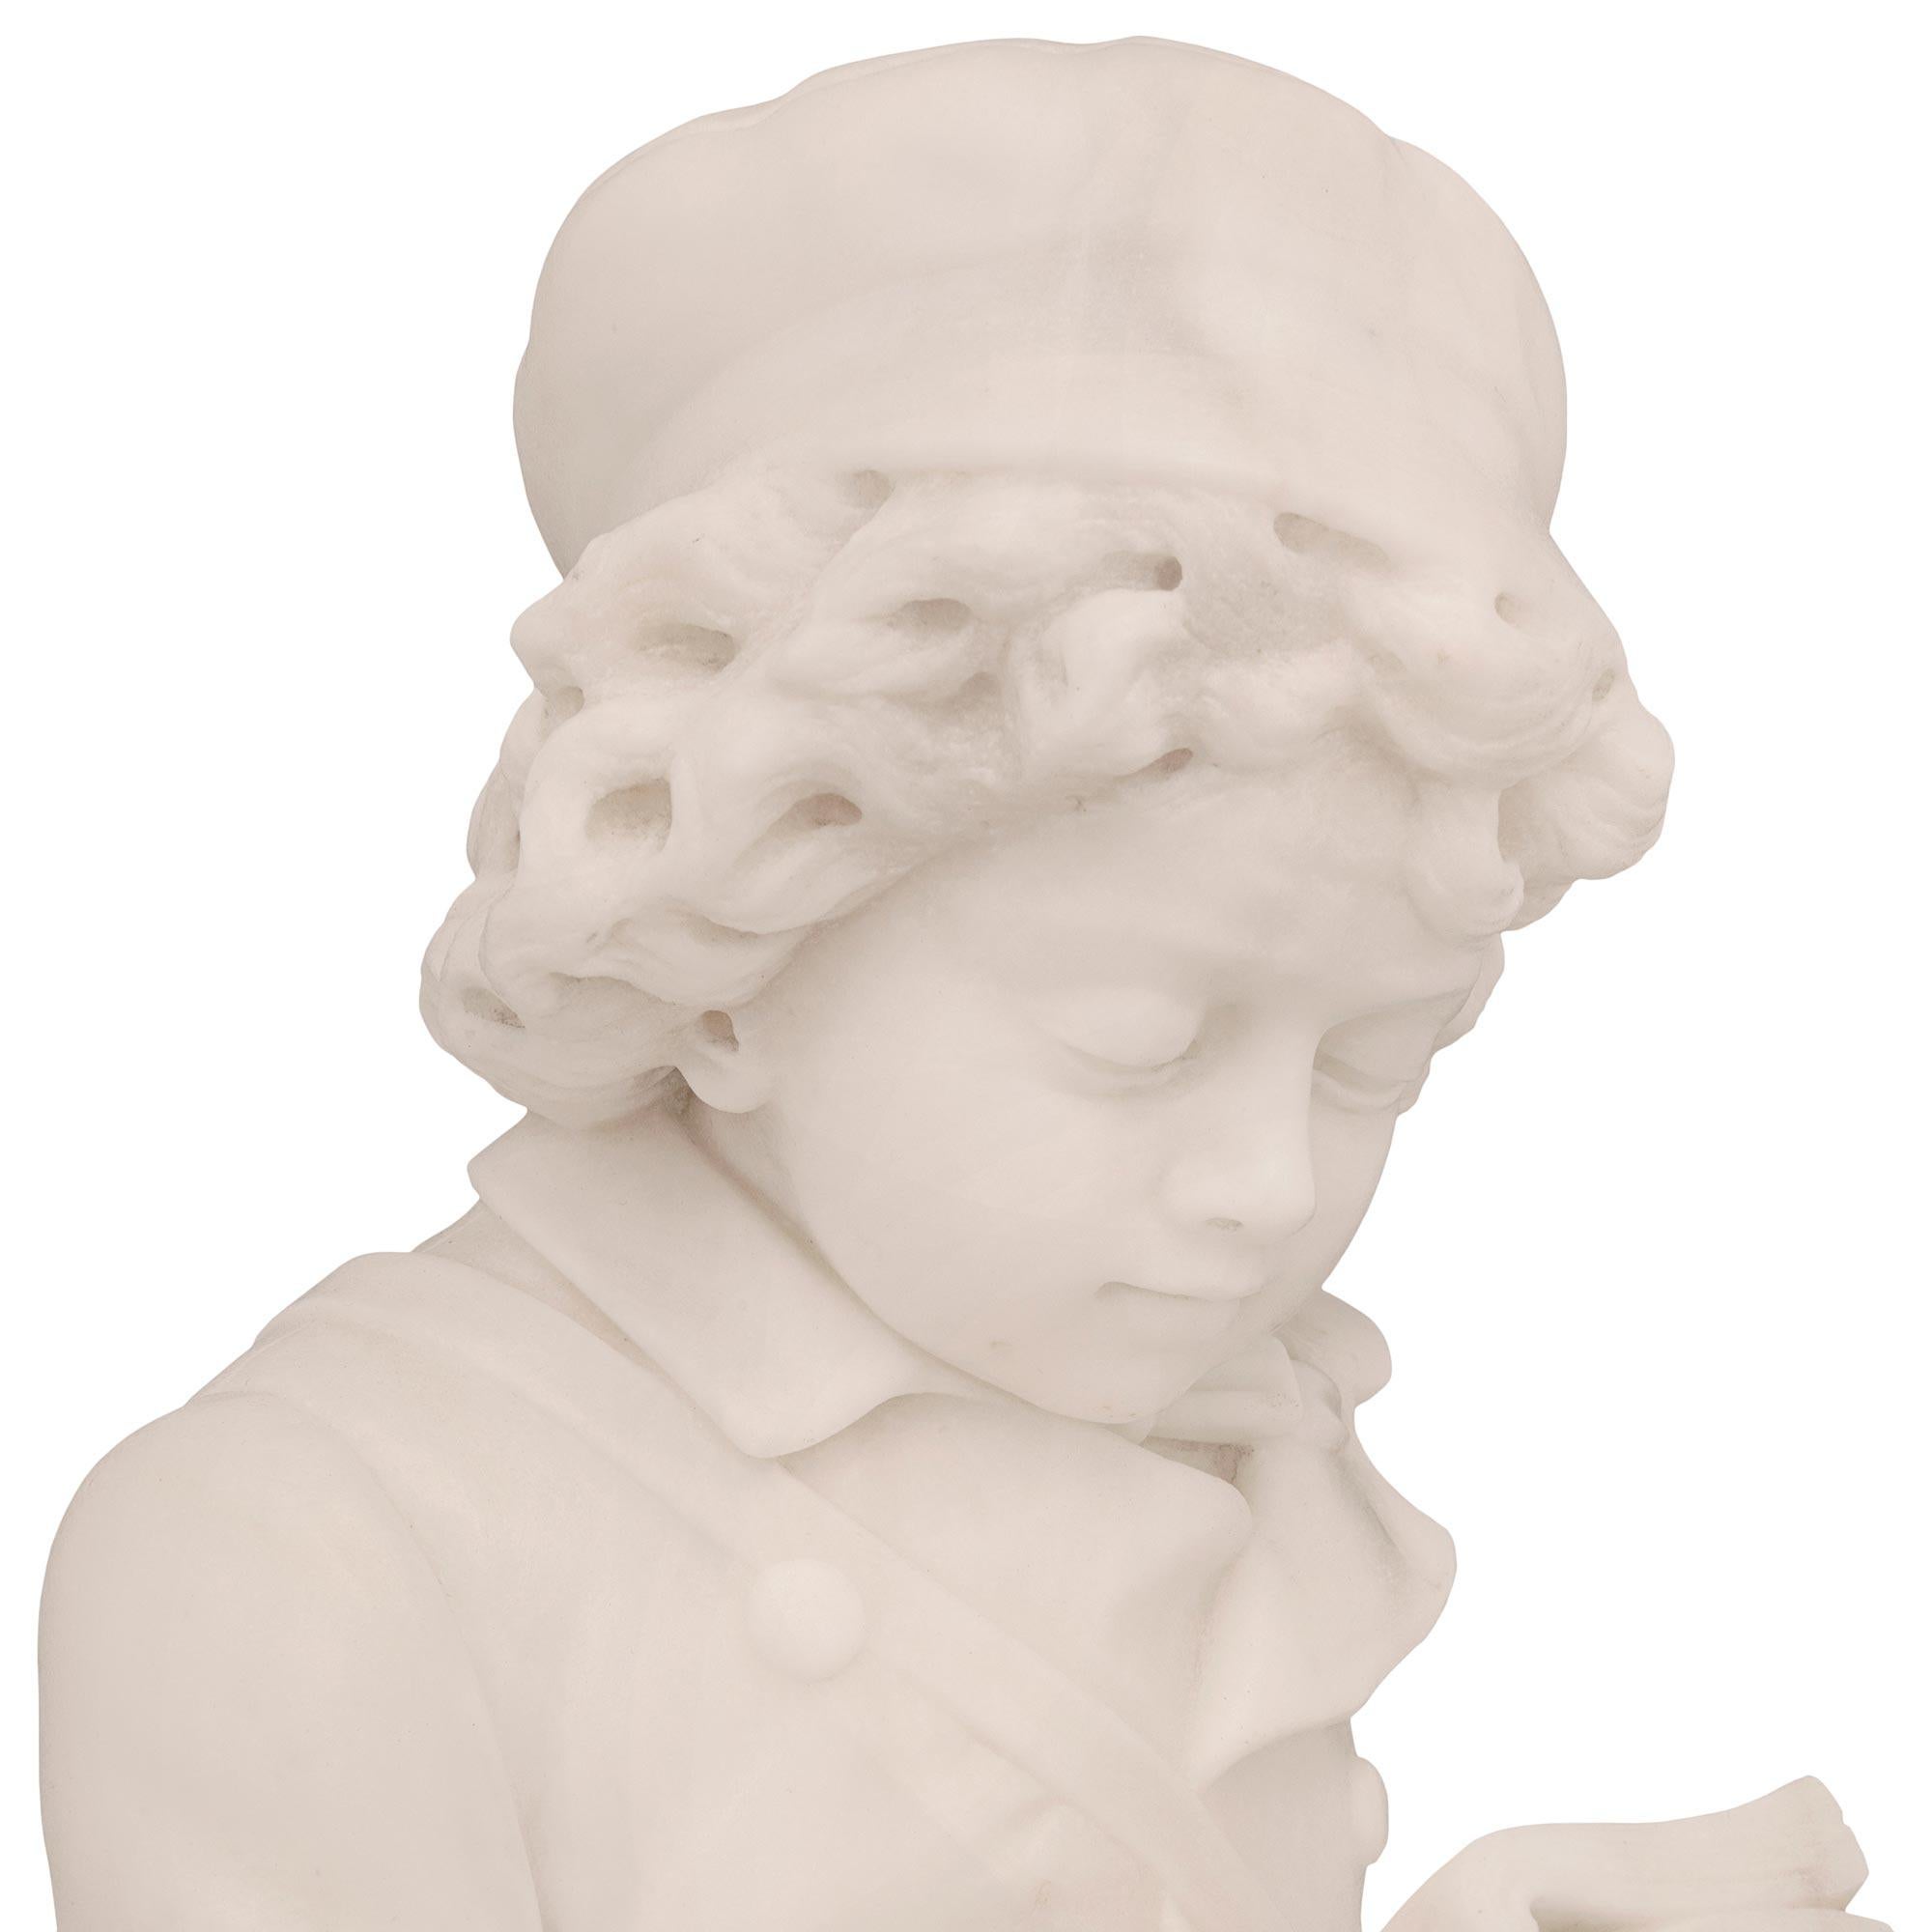 A beautiful and very high quality Italian 19th century white carrara marble statue of a young boy reading a book. The statue is raised by a circular mottled base with lovely ground like designs and fine sculpted blooming flowers. The young boy is